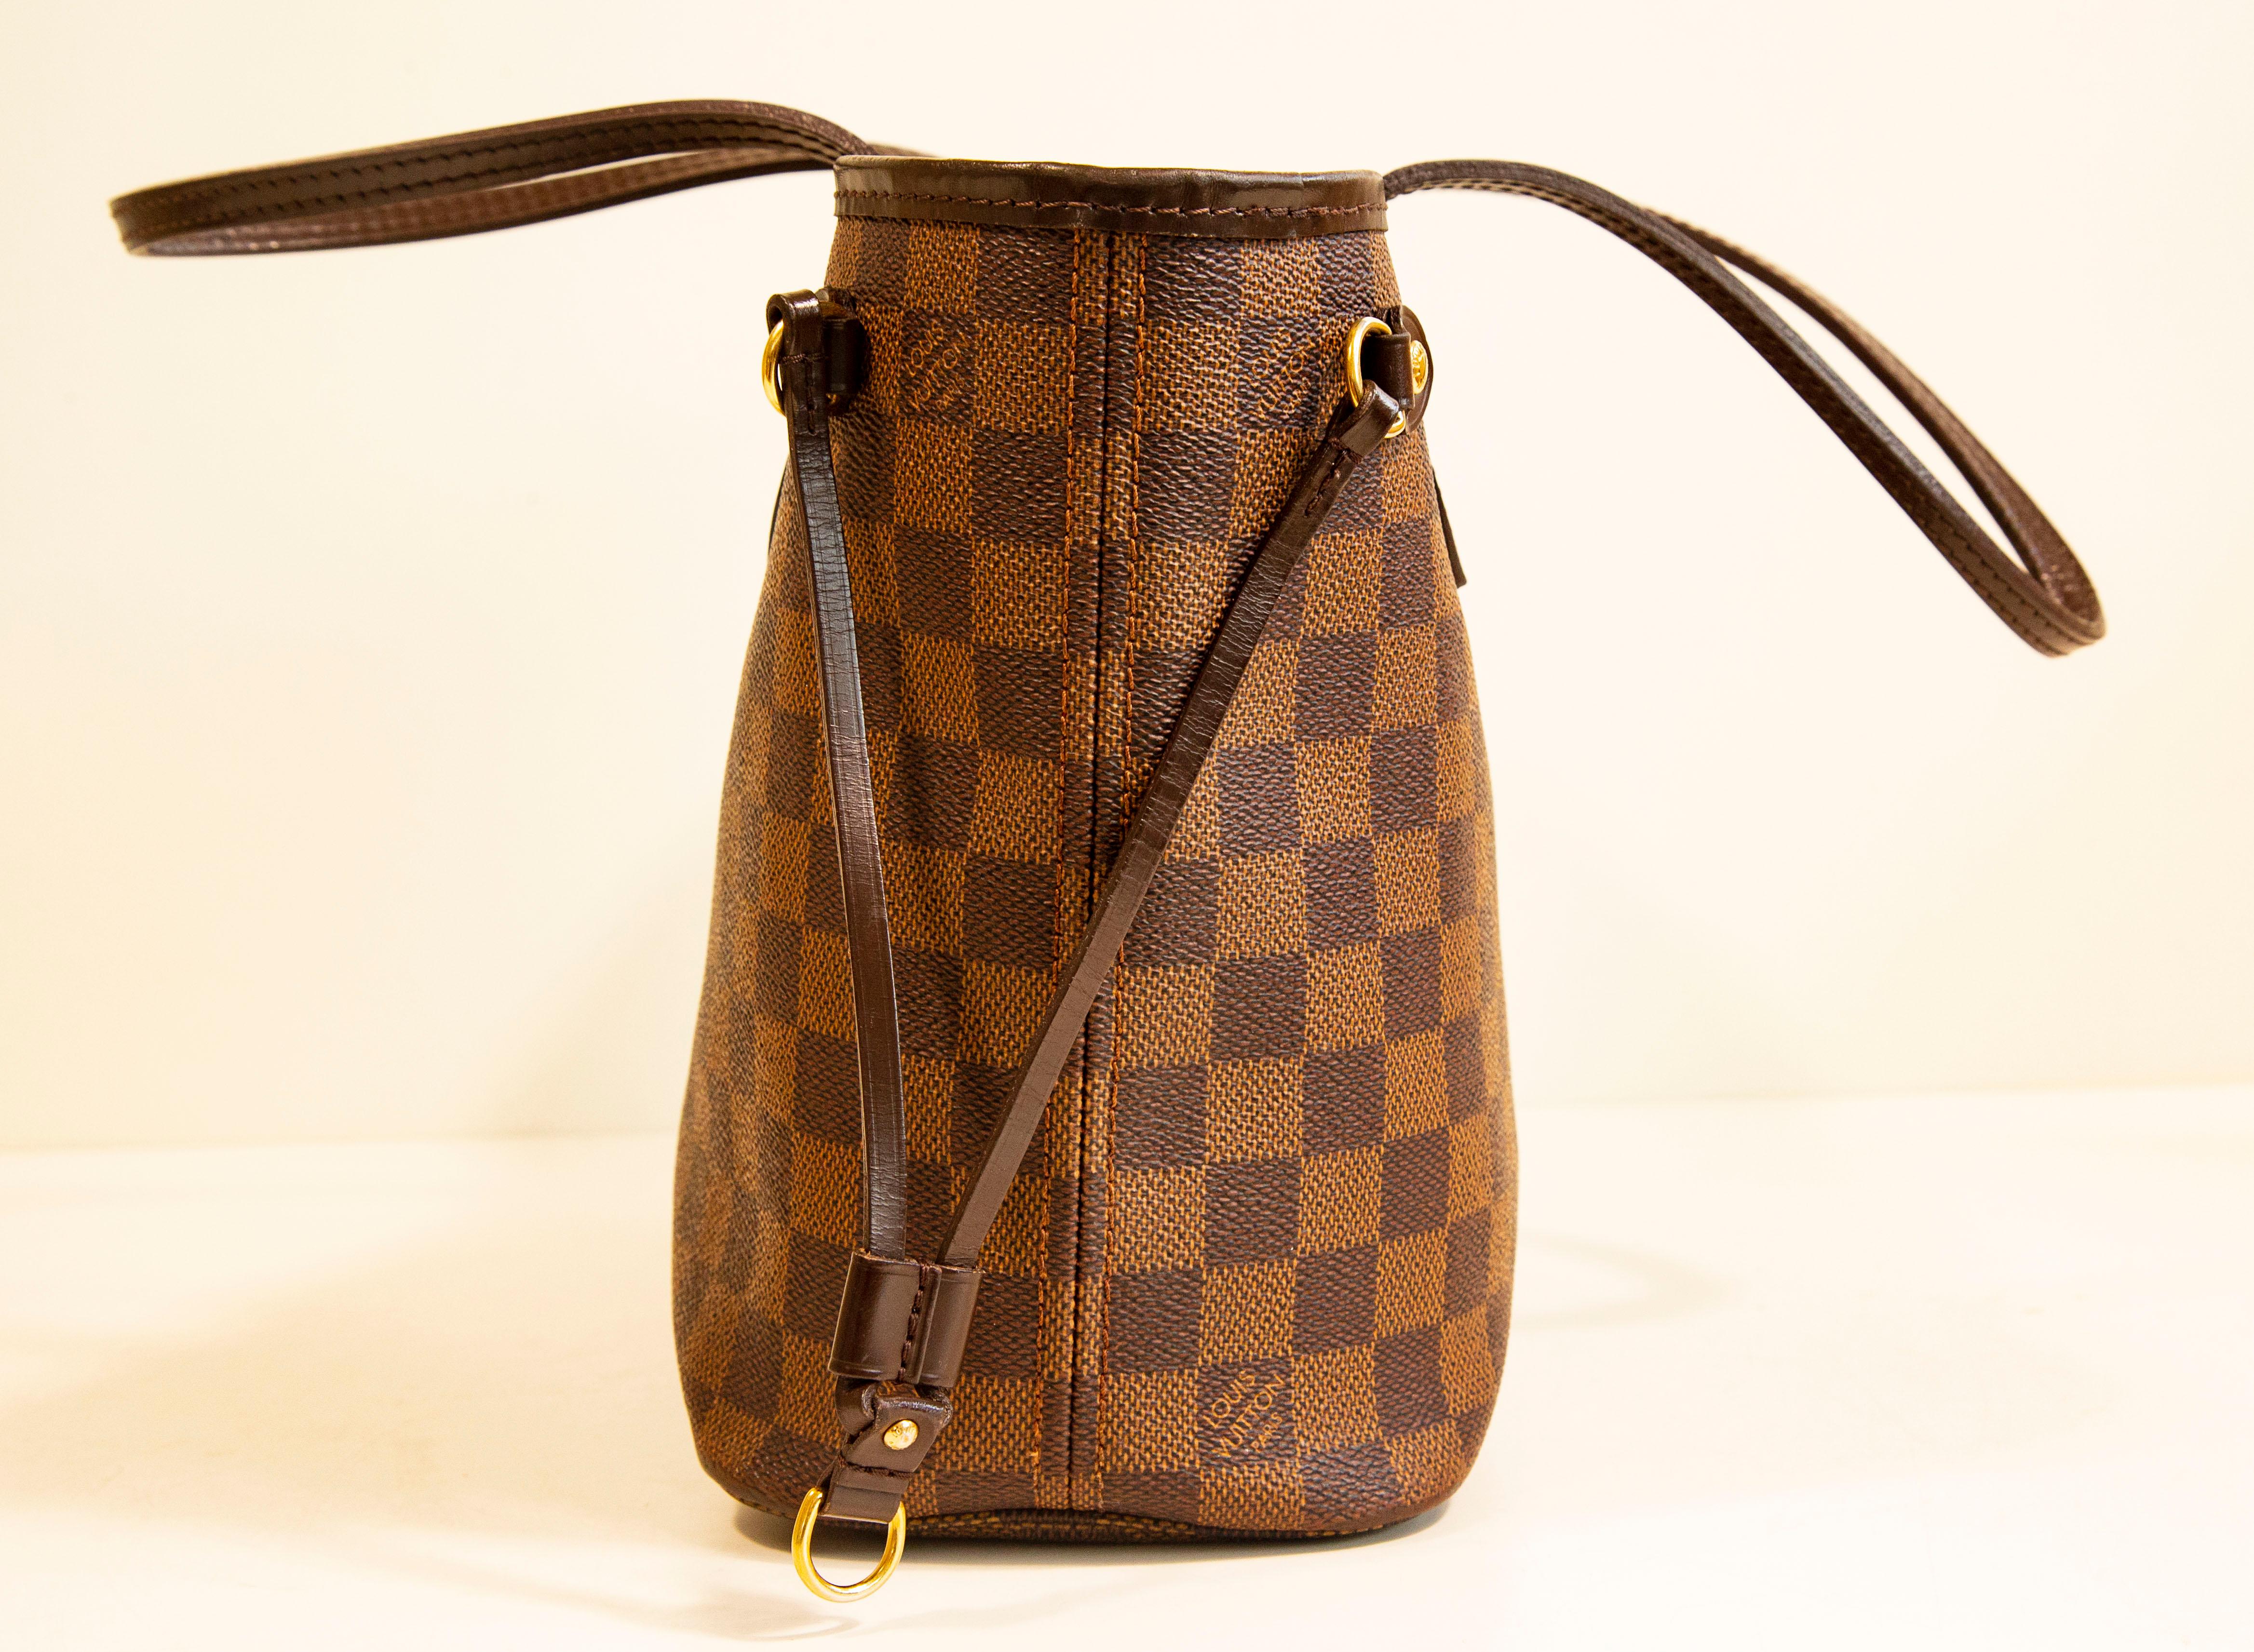 Louis Vuitton Neverfull PM Tote Shoulder Bag in Damier Ebene For Sale 4